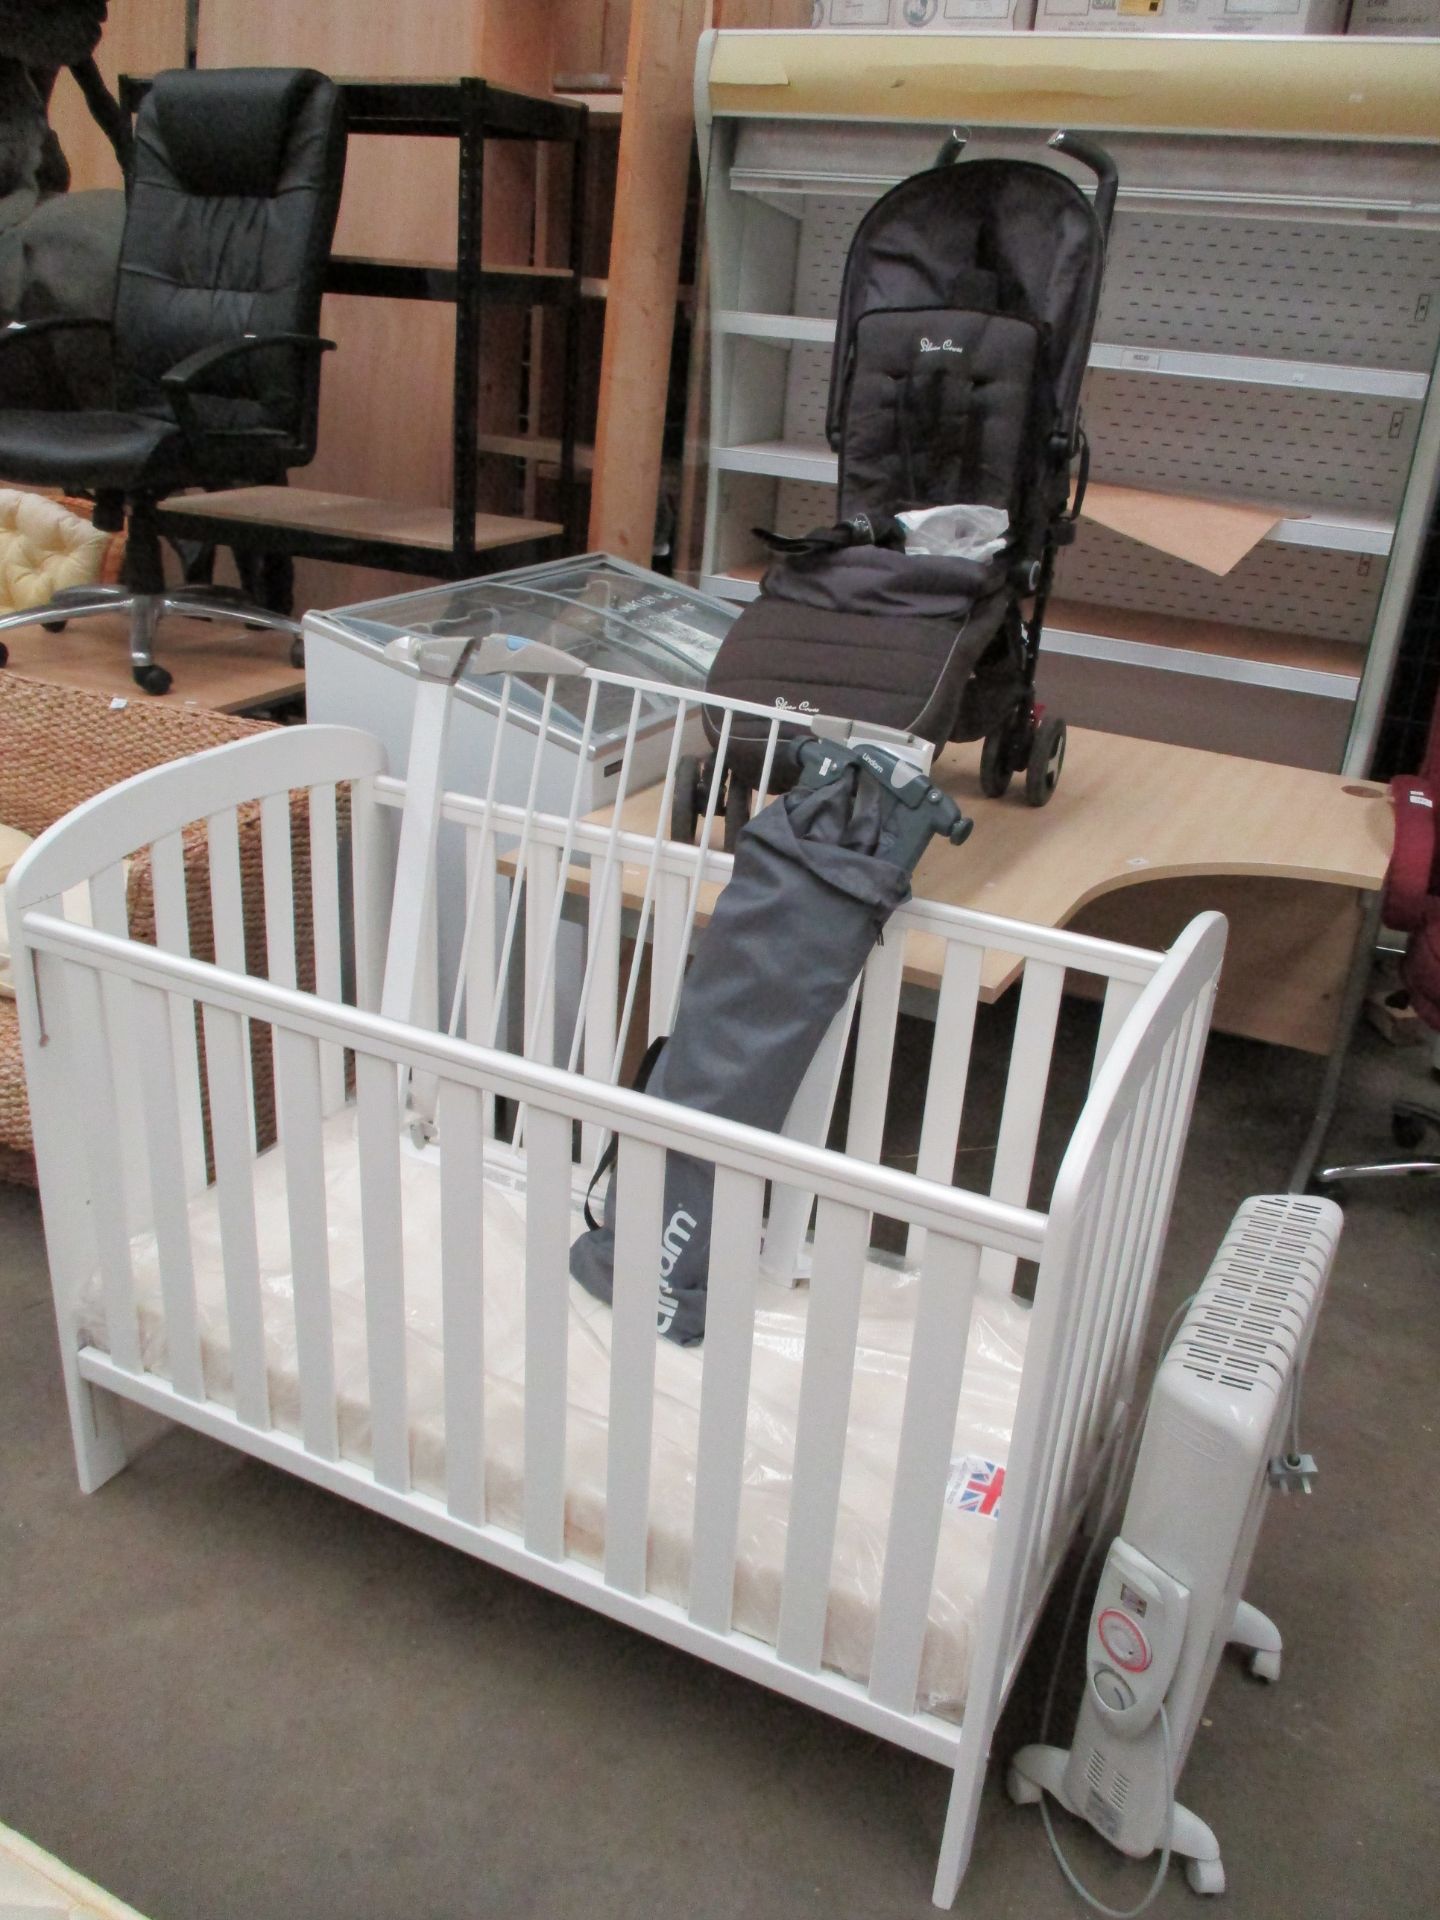 A white wooden cot with a mattress complete with a Lindam safety gate and Silver Cross pushchair